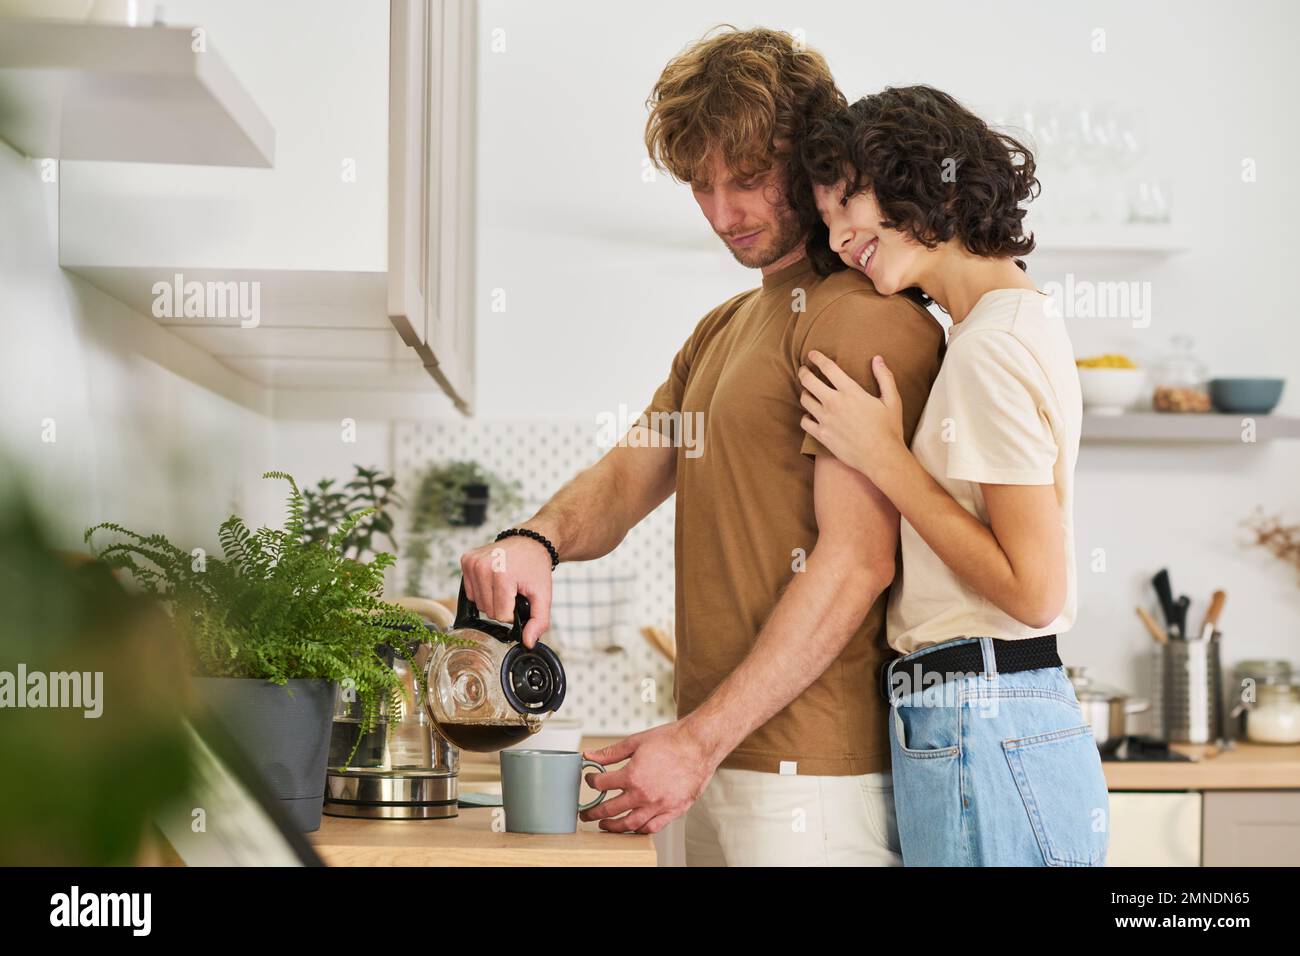 Young smiling woman standing close to her husband pouring coffee in grey mug and embracing him while looking forwards for breakfast Stock Photo